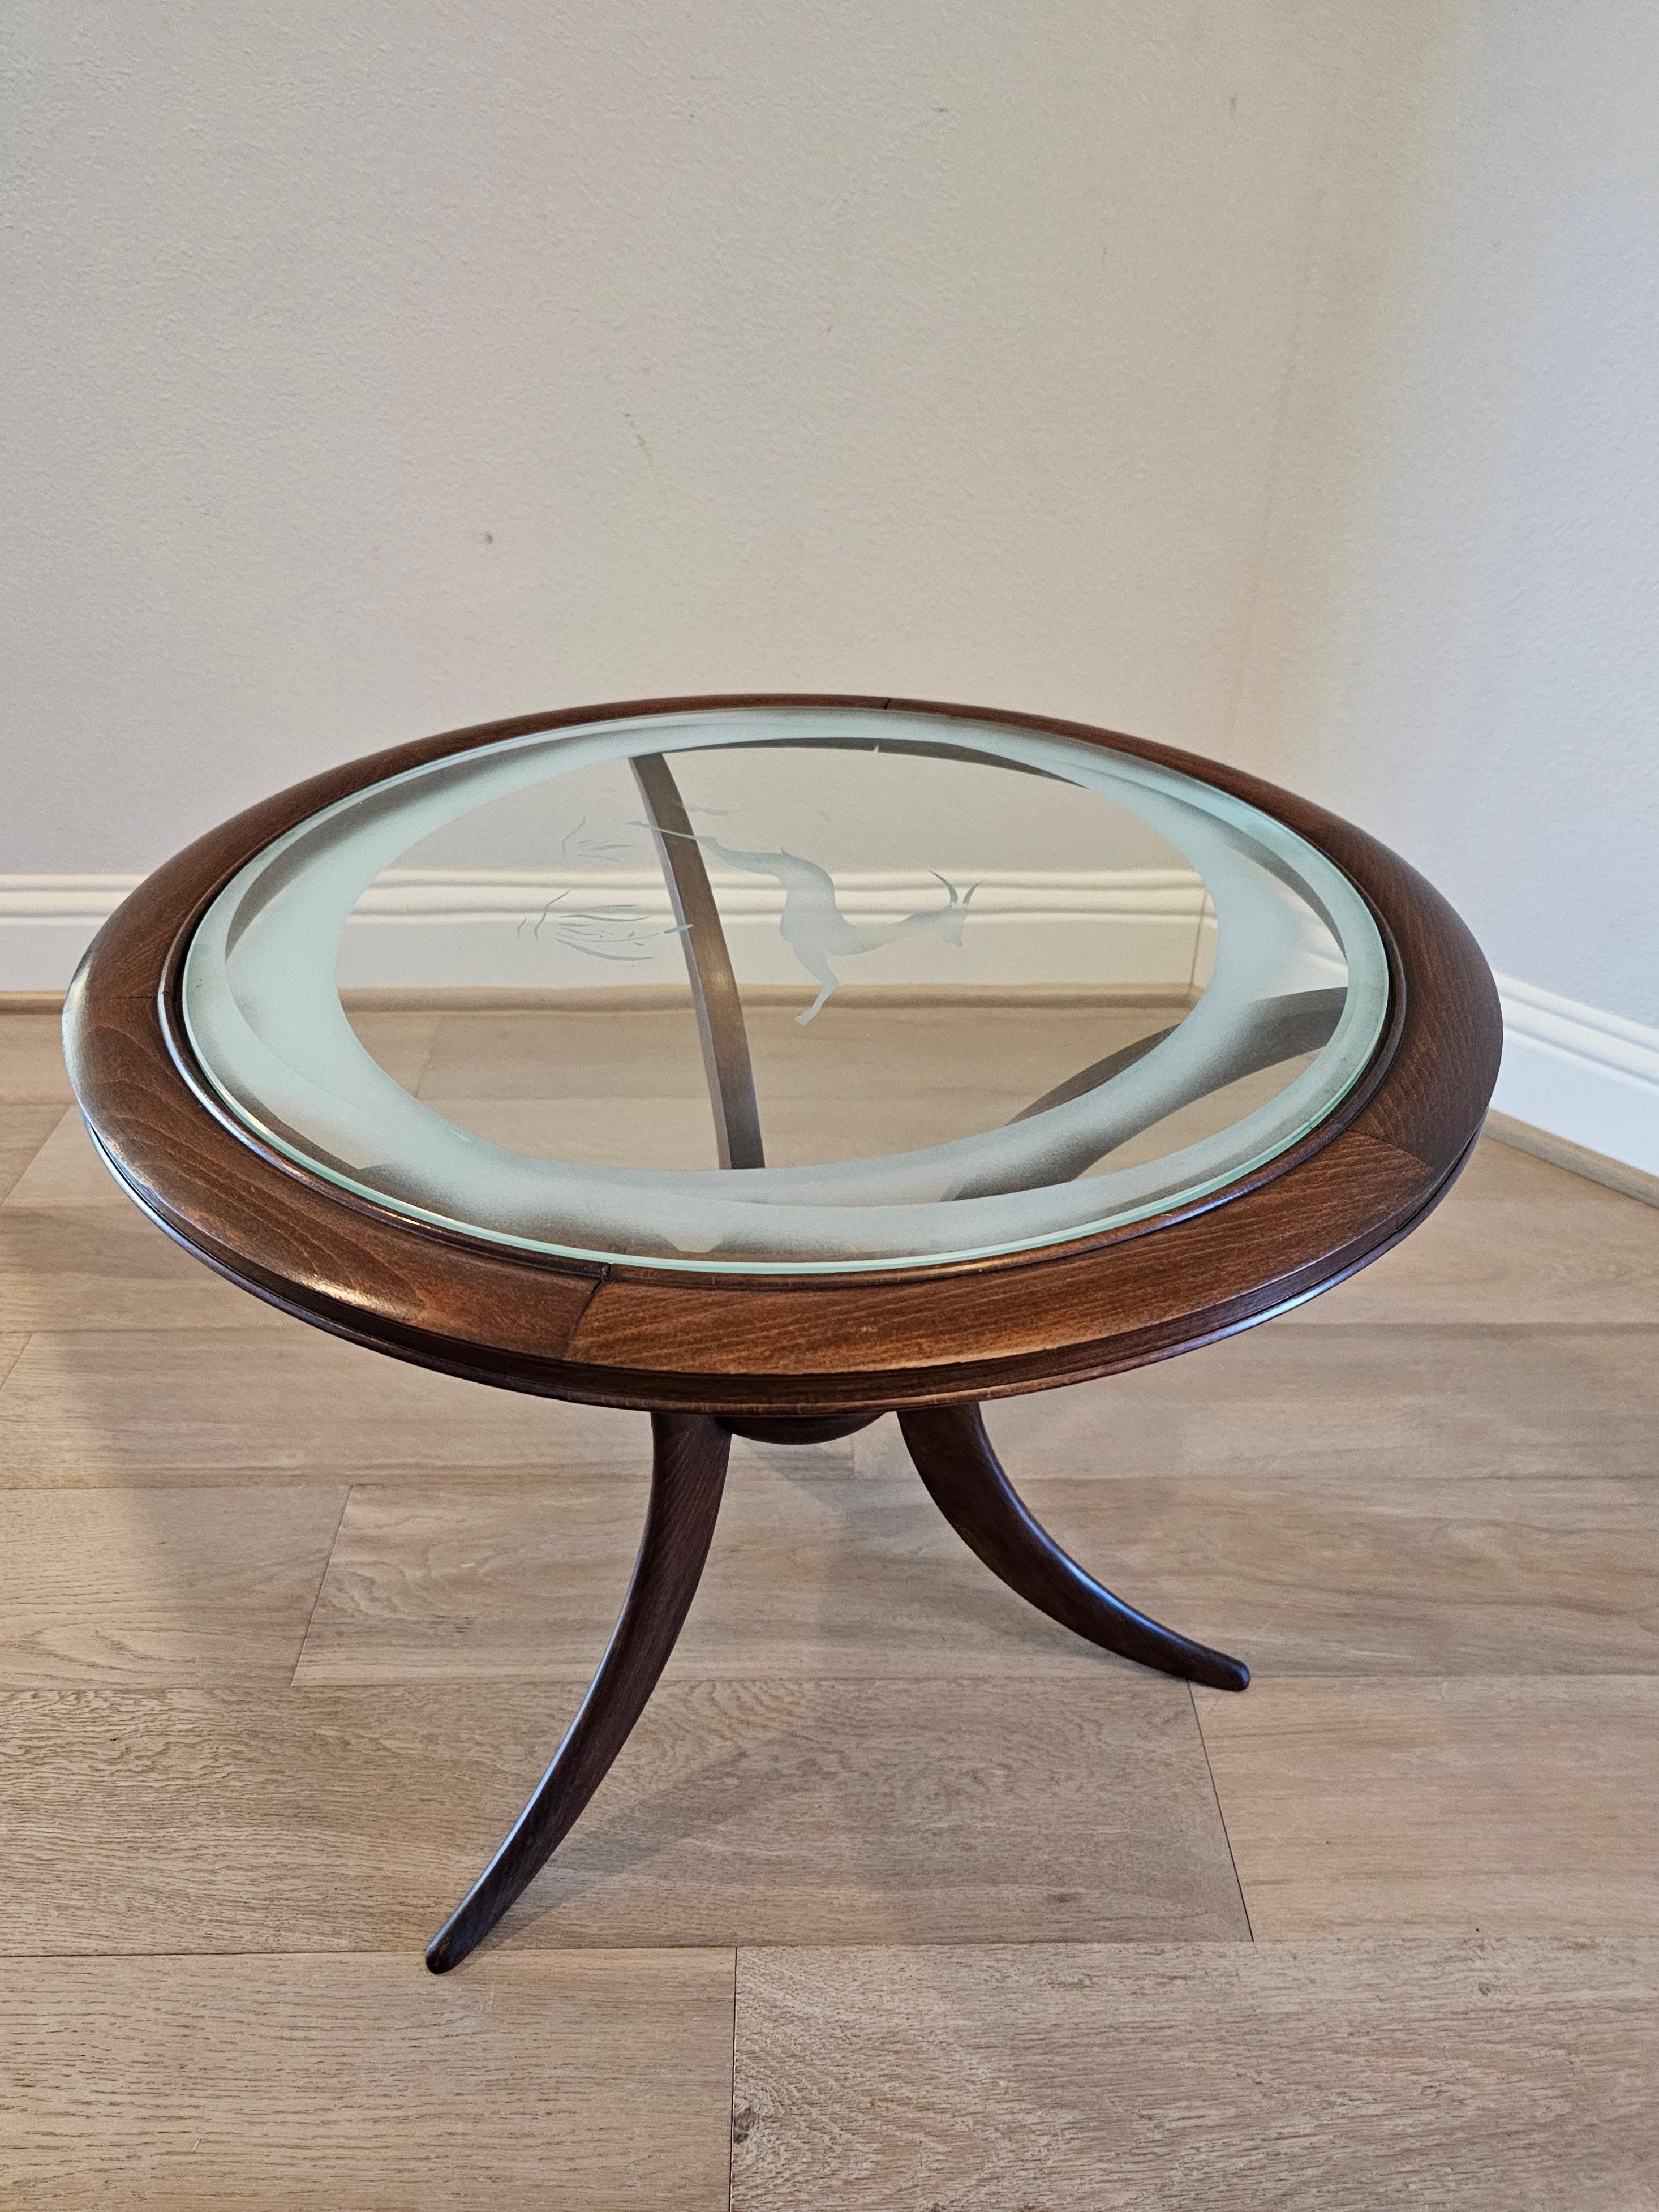 1940s Italian Mid-Century Modern Round Etched Glass Side Table  For Sale 3